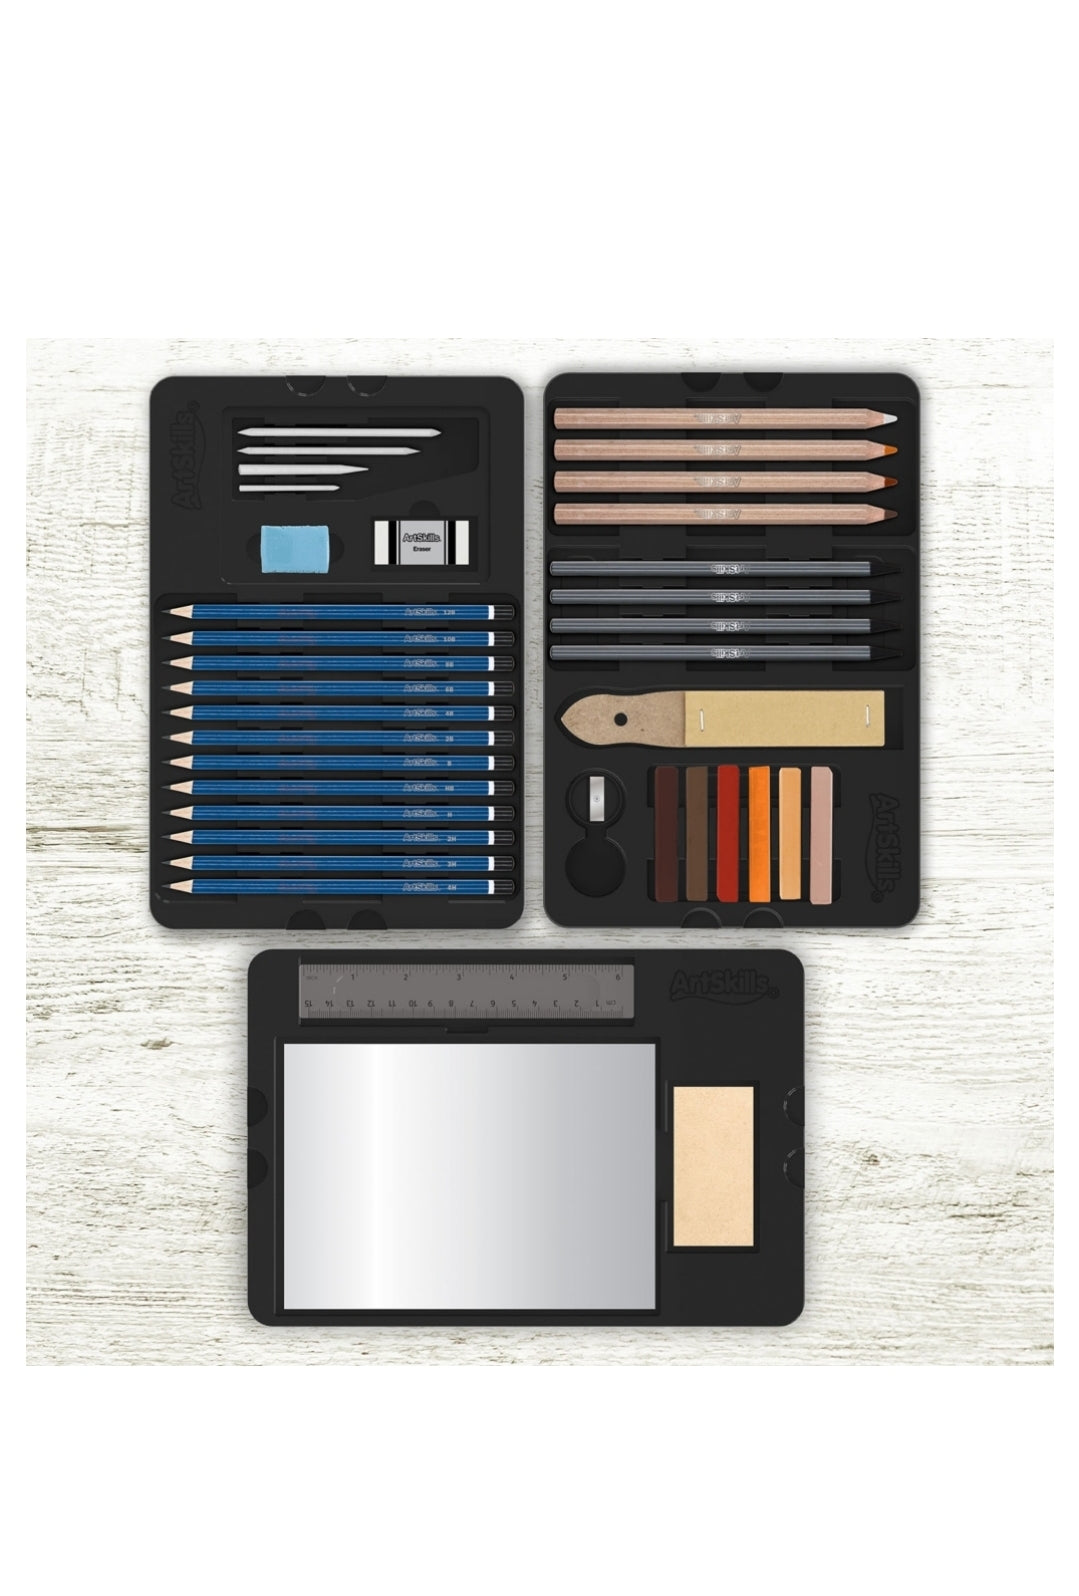 Assorted Premium Sketching and Drawing Kit, 39 Pieces – Varieties Hub Co.